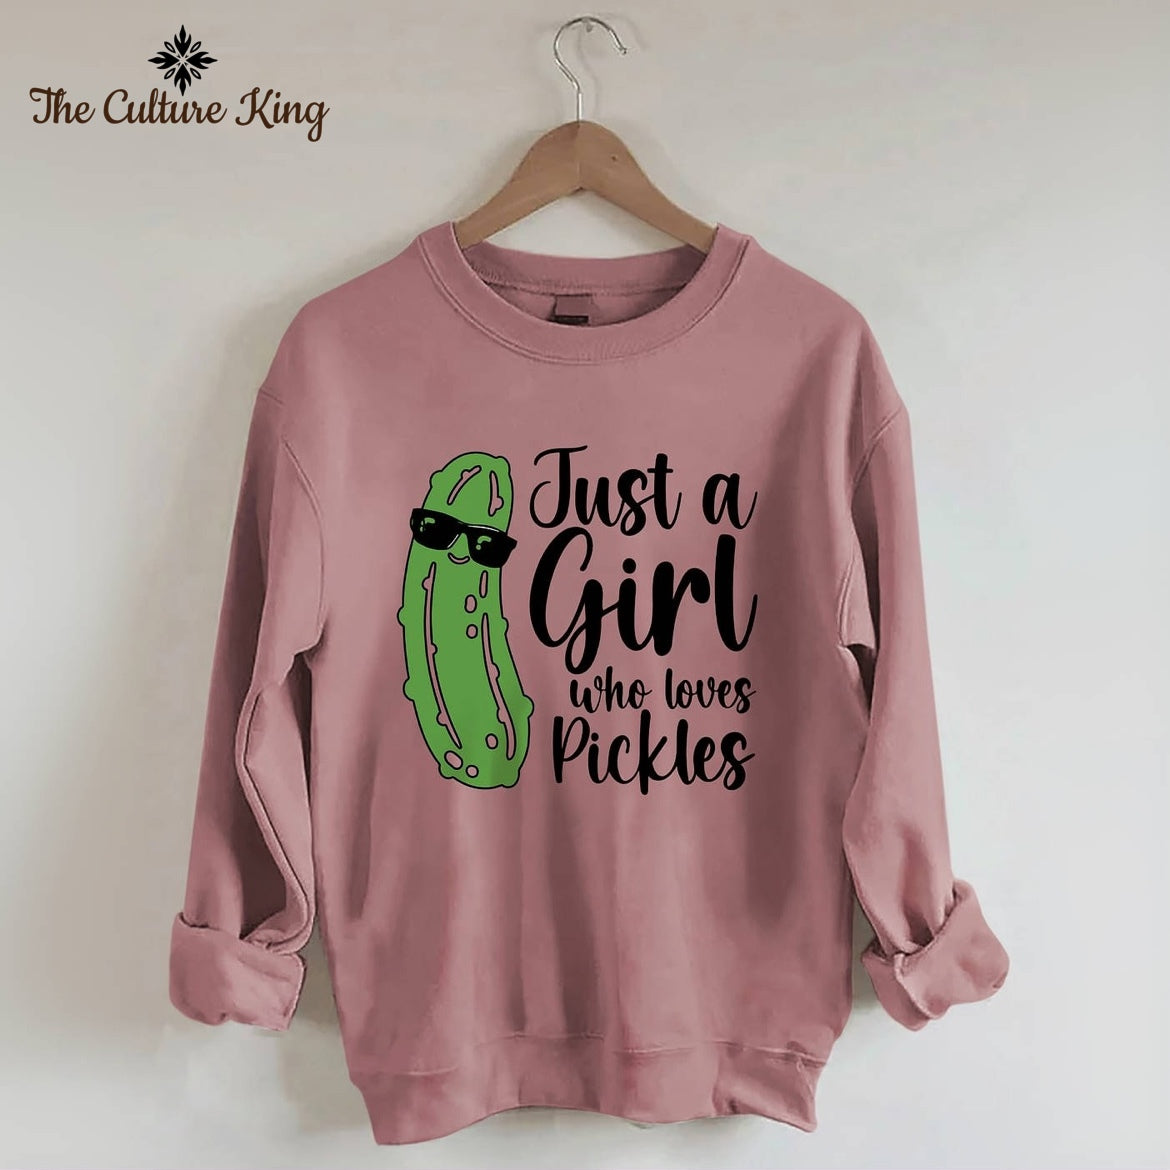 Just a Girl Who Loves Pickles Sweatshirt